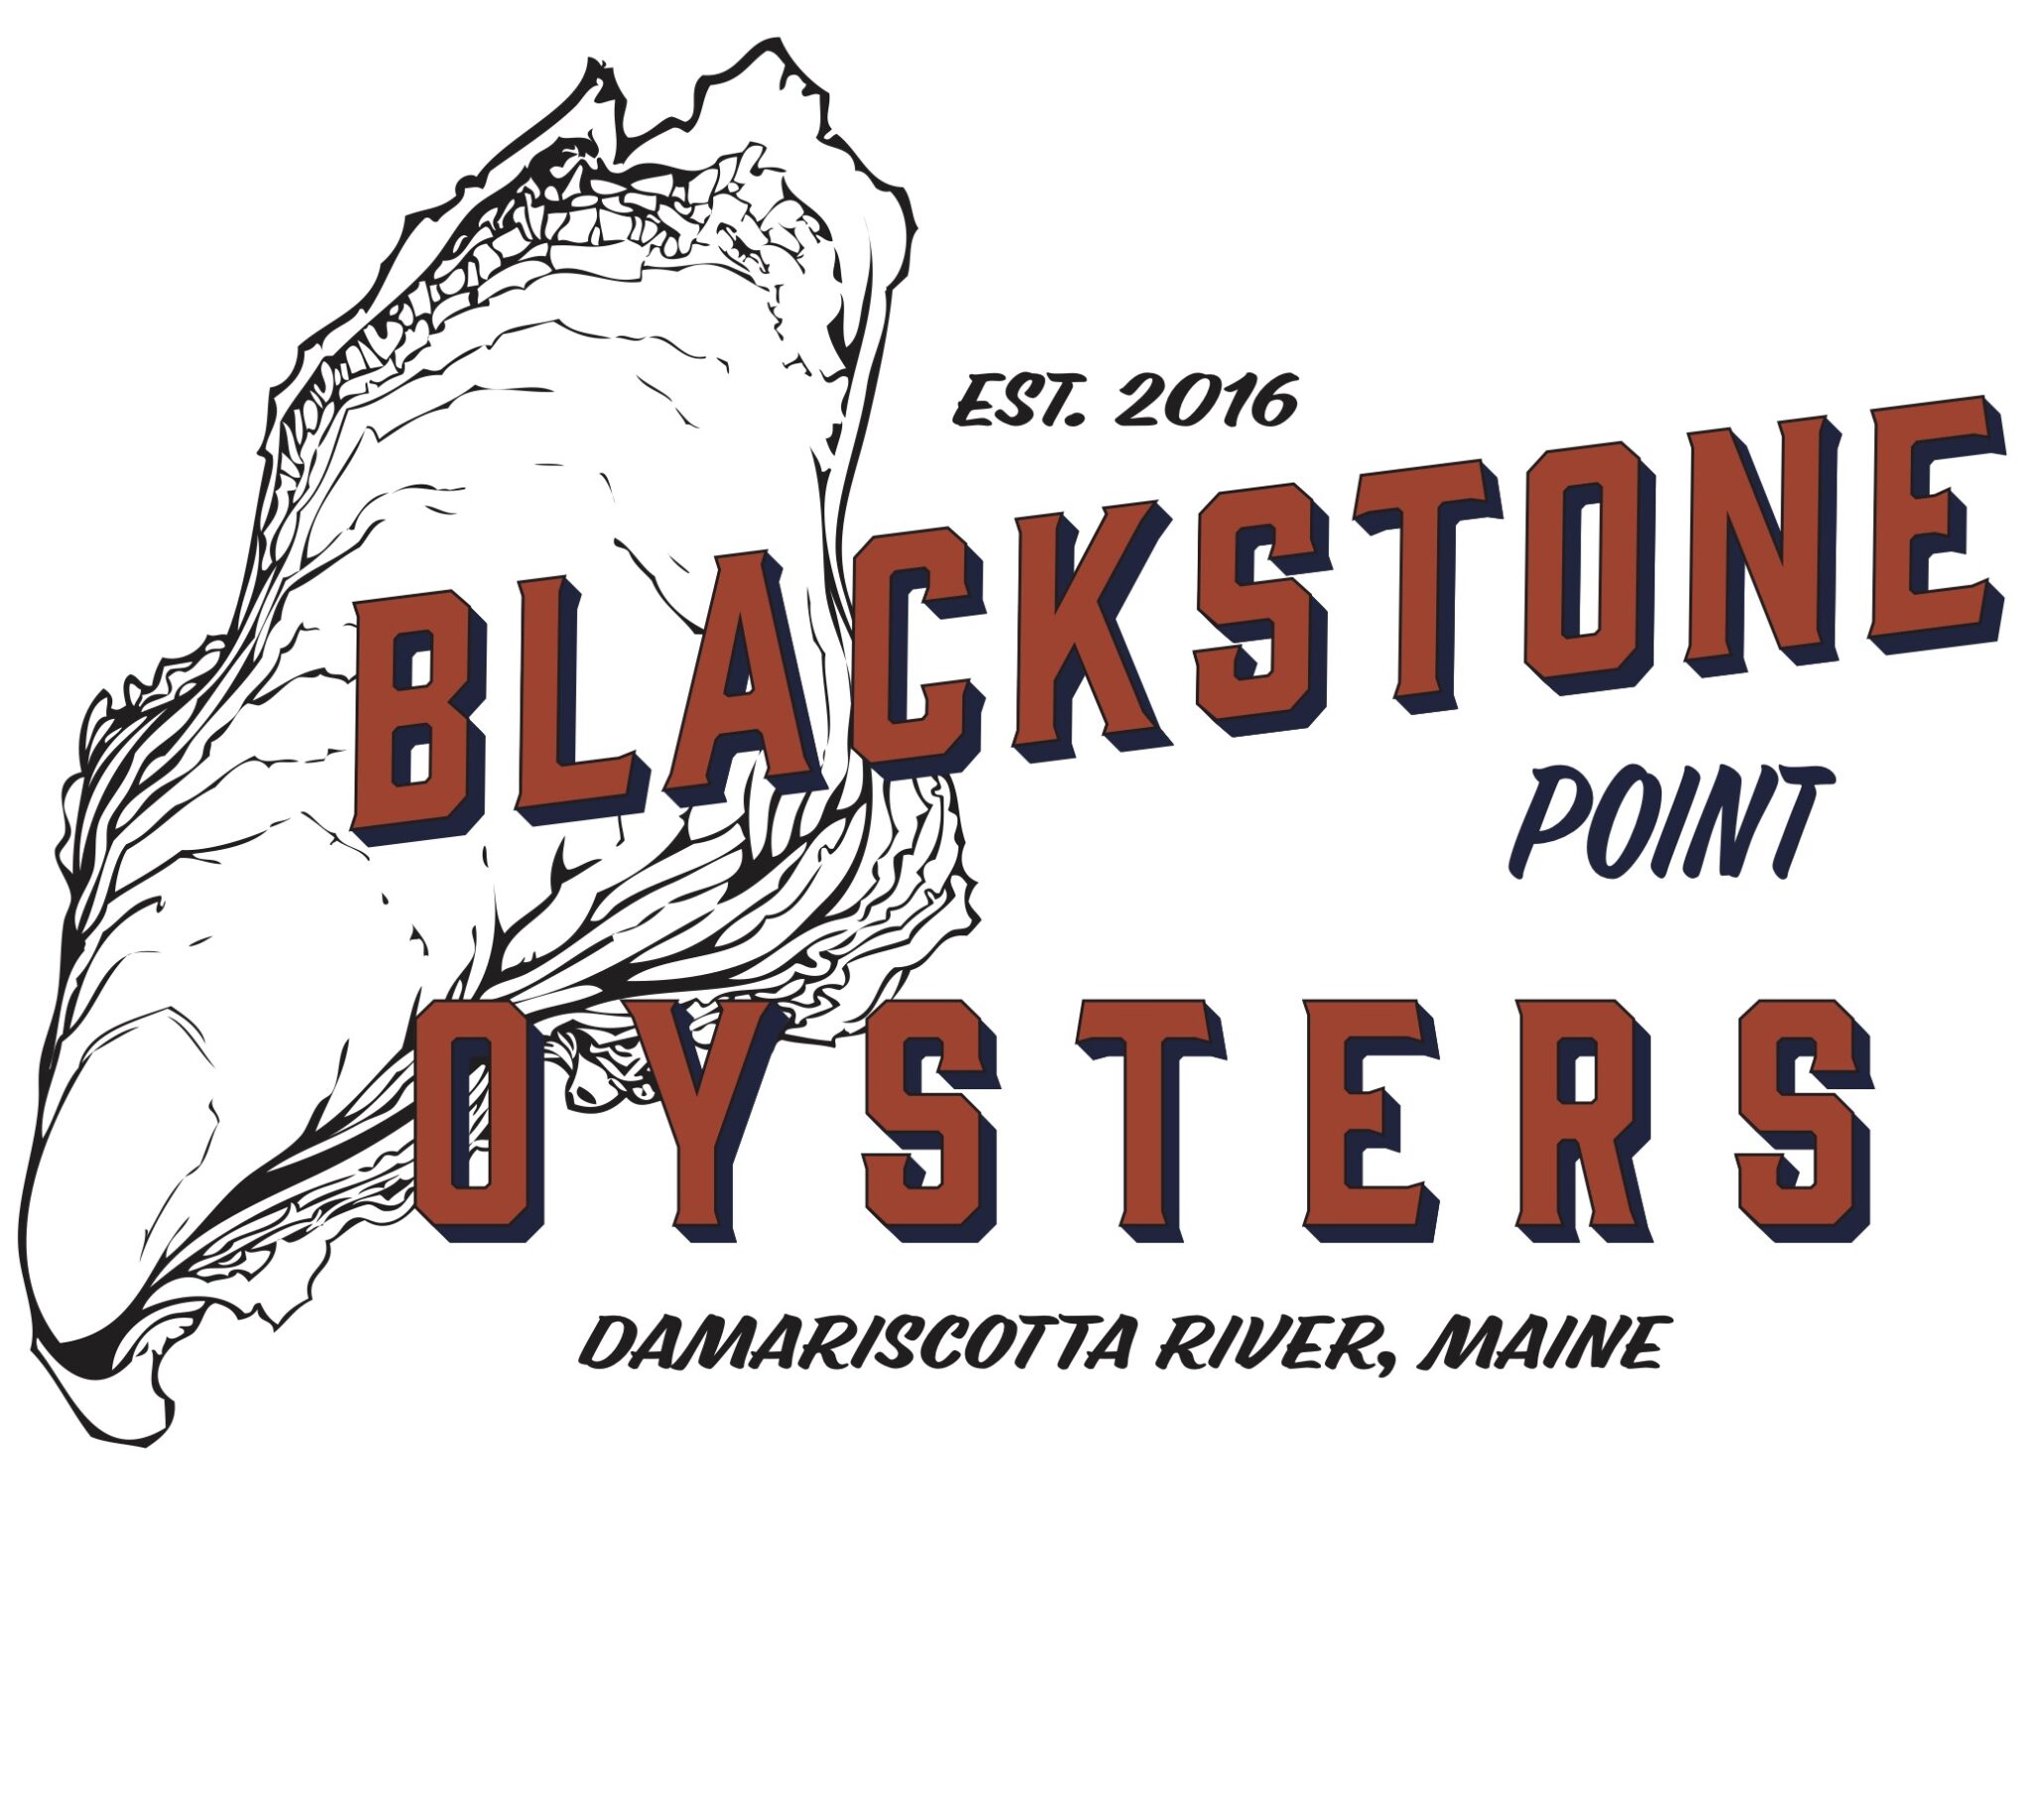 Blackstone Point Oyster Co.